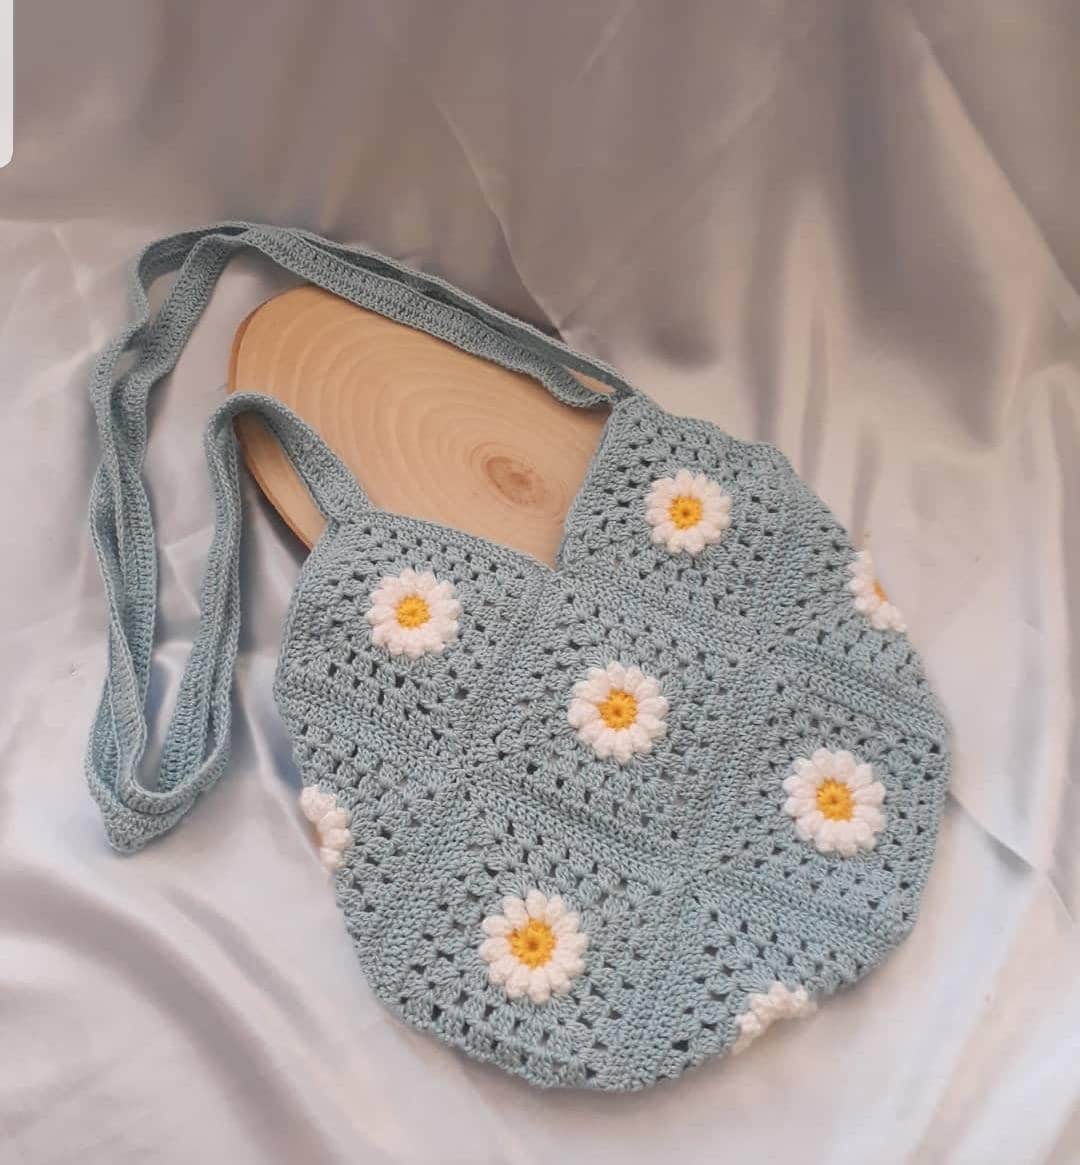 Hand Bag Star Design Crocheted Knit Purse Tote Y2k Aesthetic 